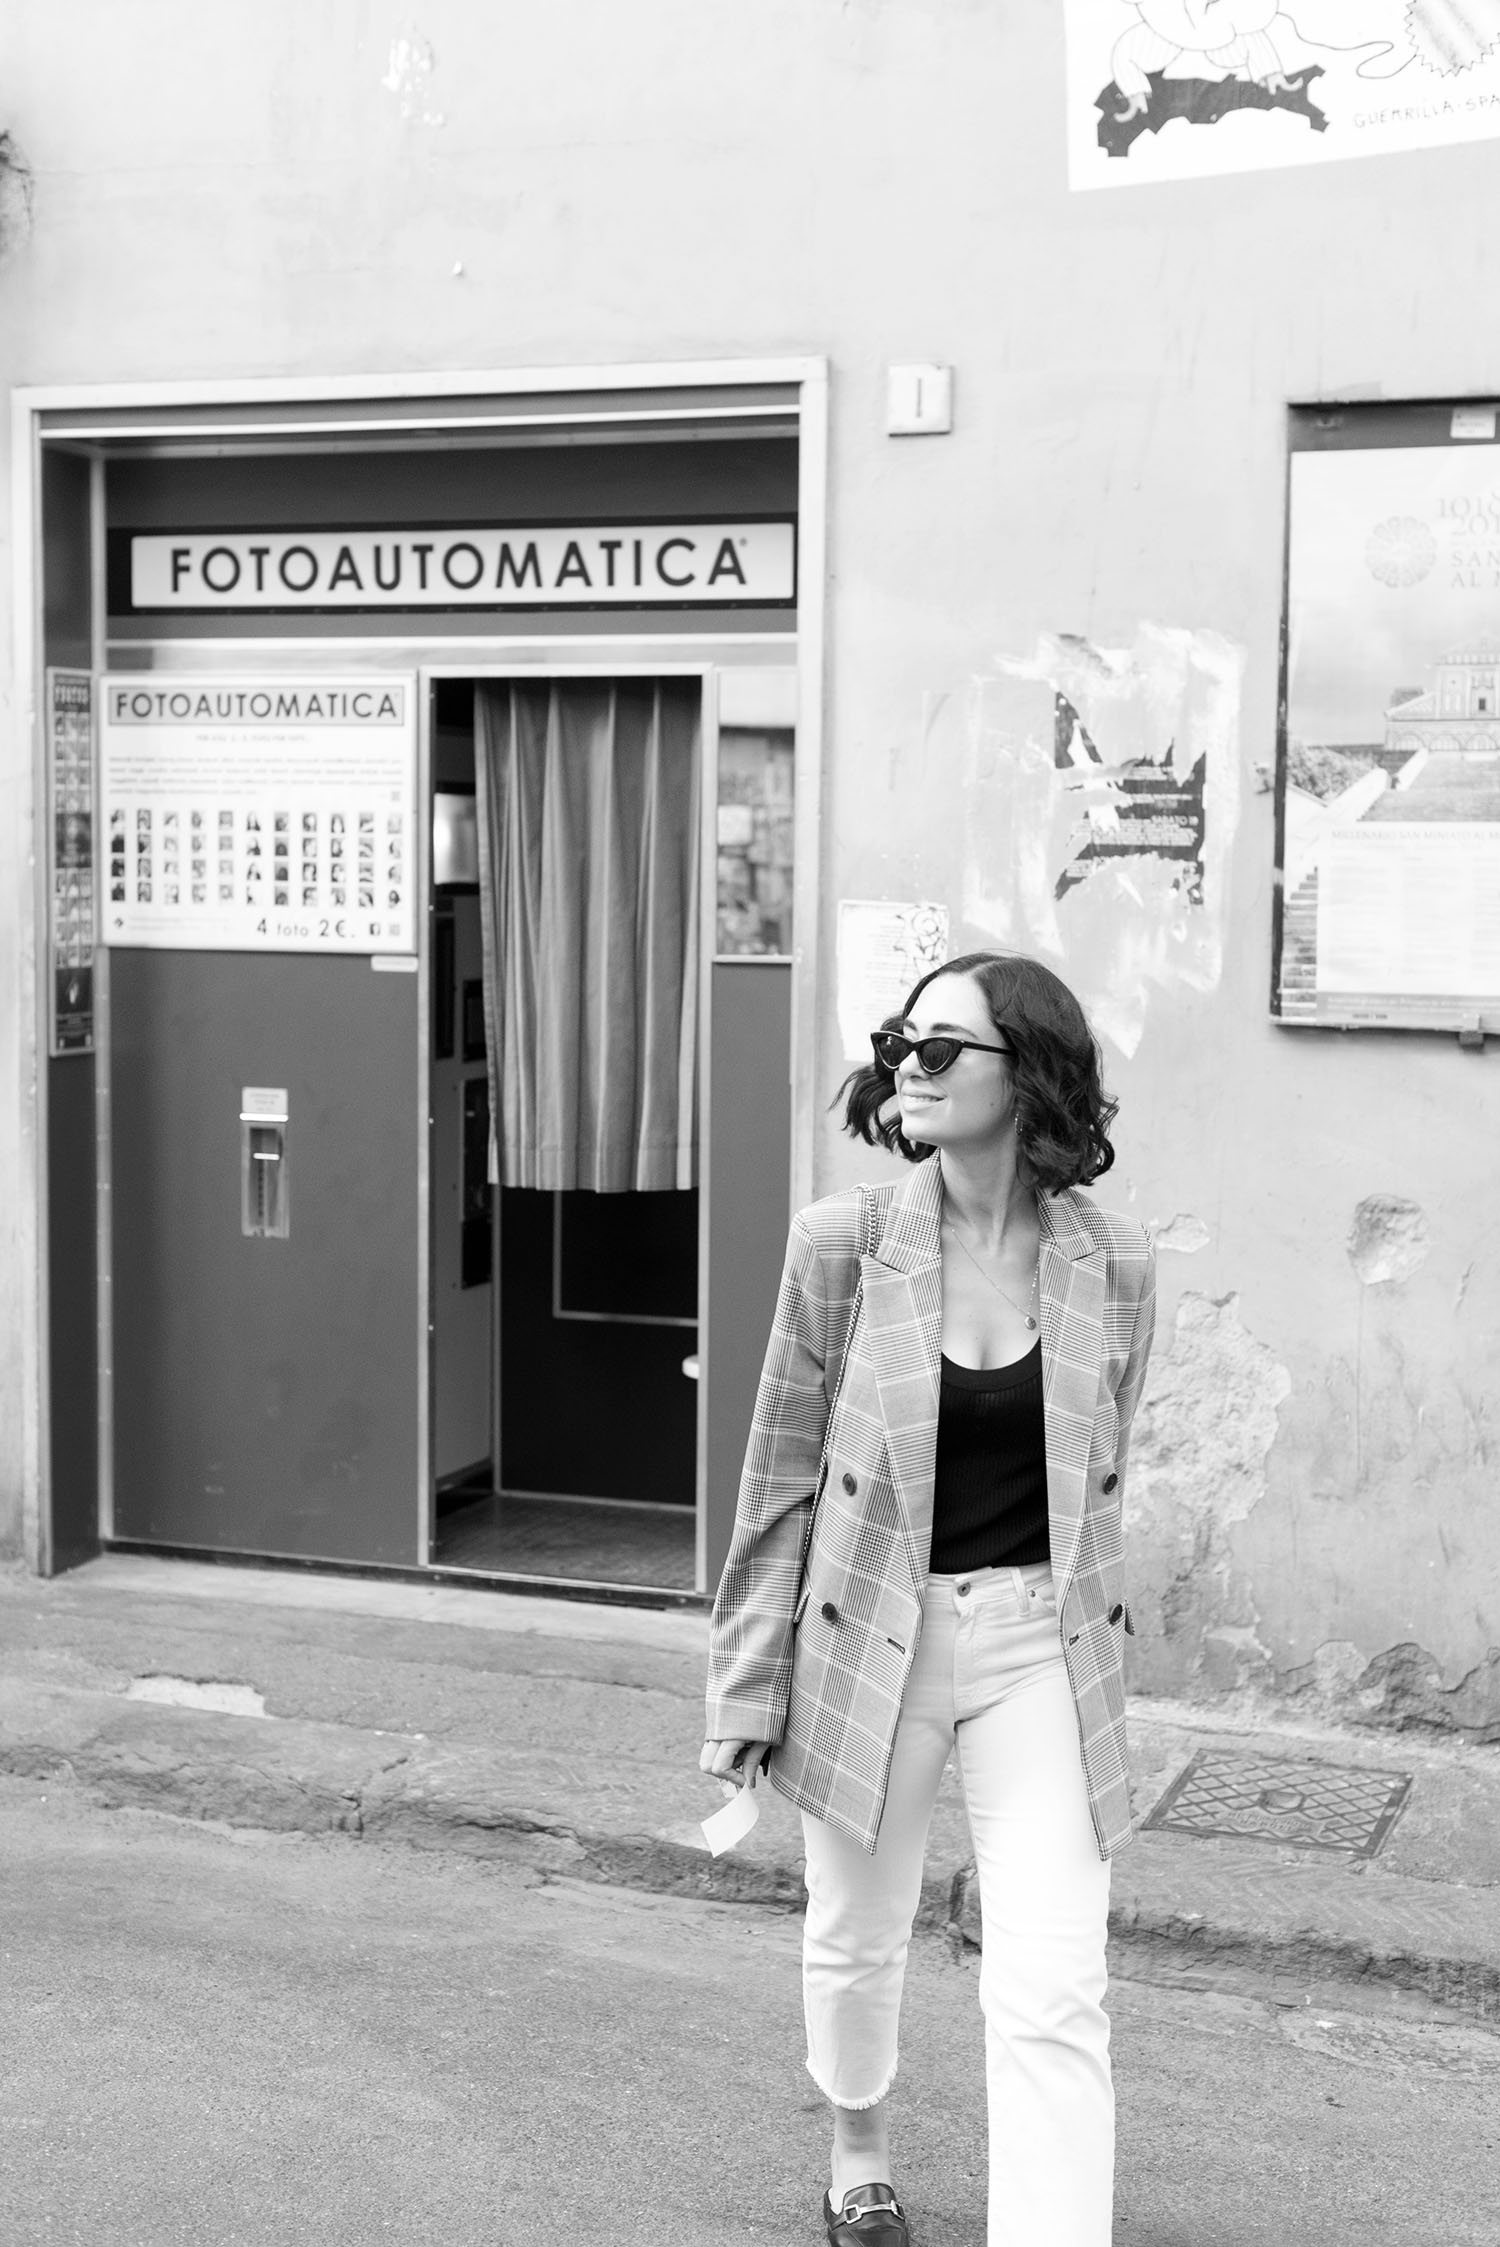 Top Canadian fashion blogger Cee Fardoe of Coco & Vera crosses the street in Florence, Italy, wearing a Mango tweed blazer and Zara ribbed top